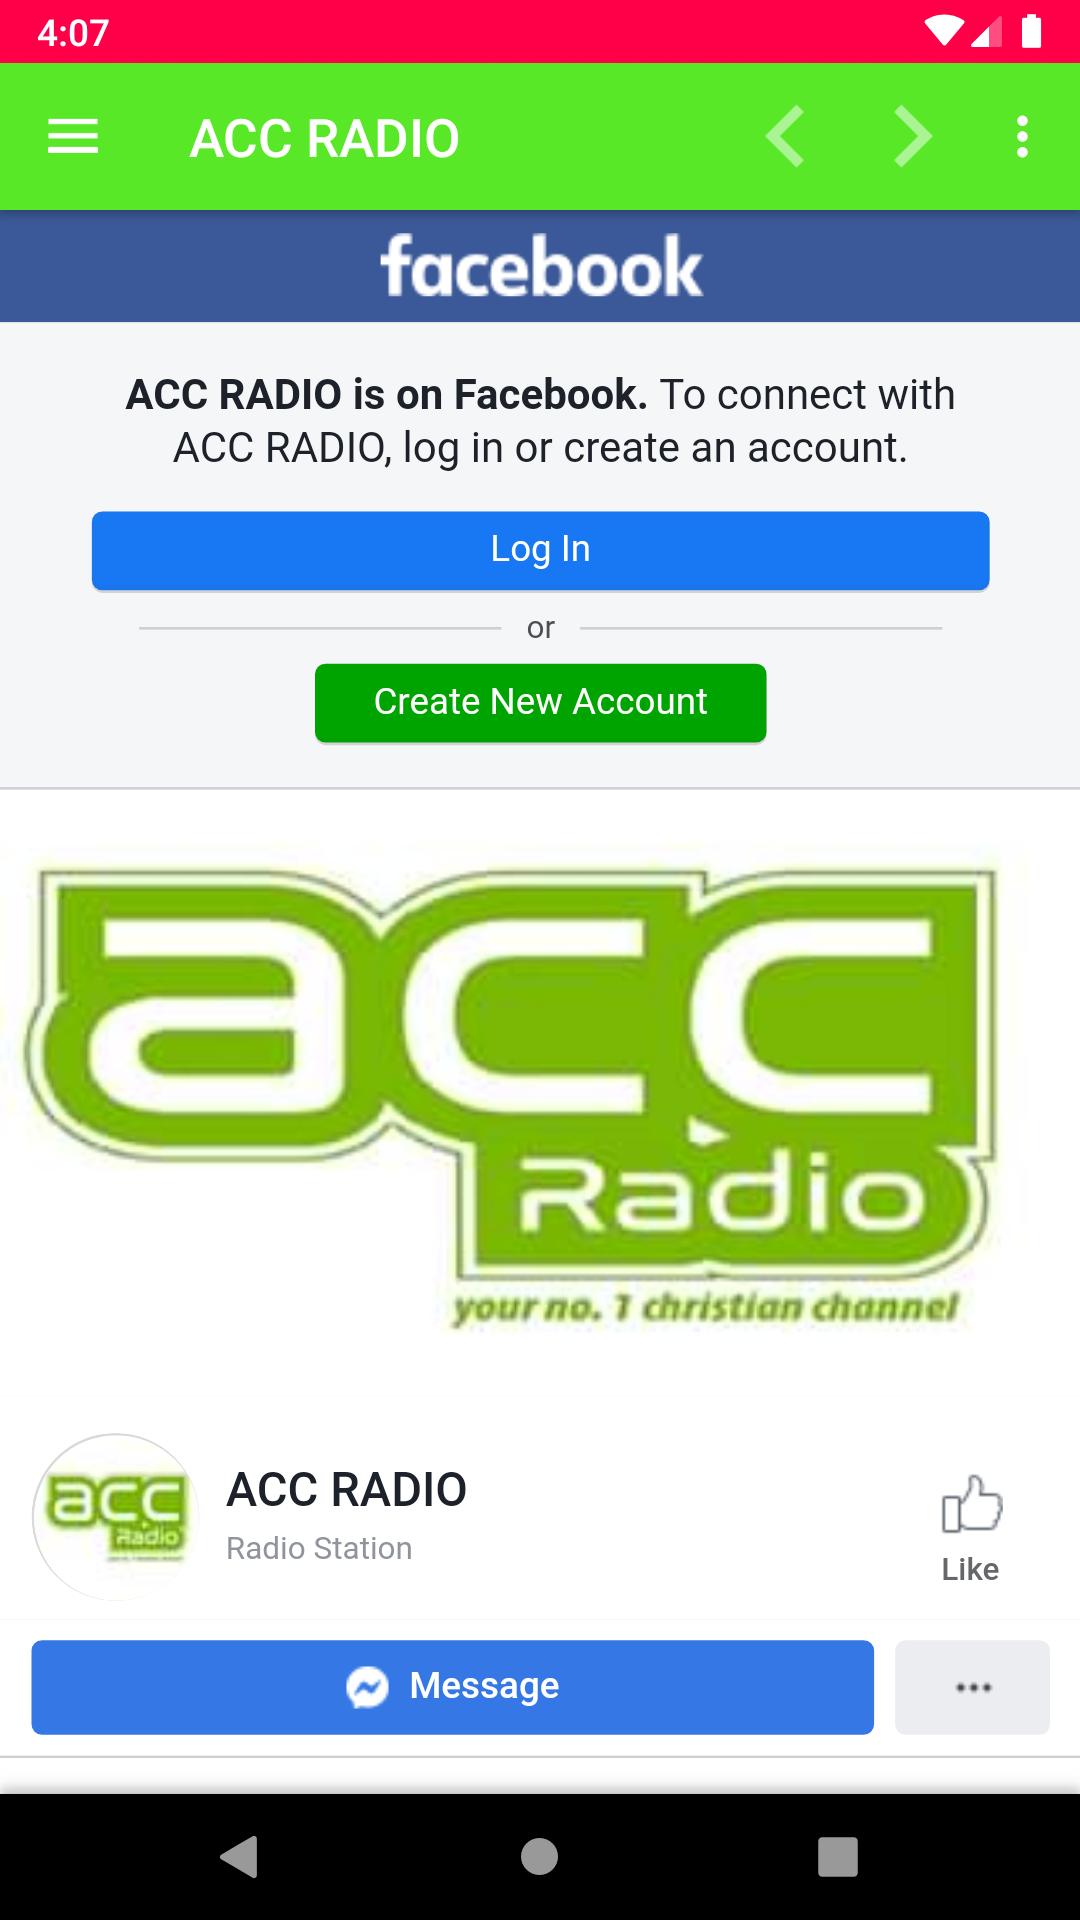 ACC RADIO for Android - APK Download